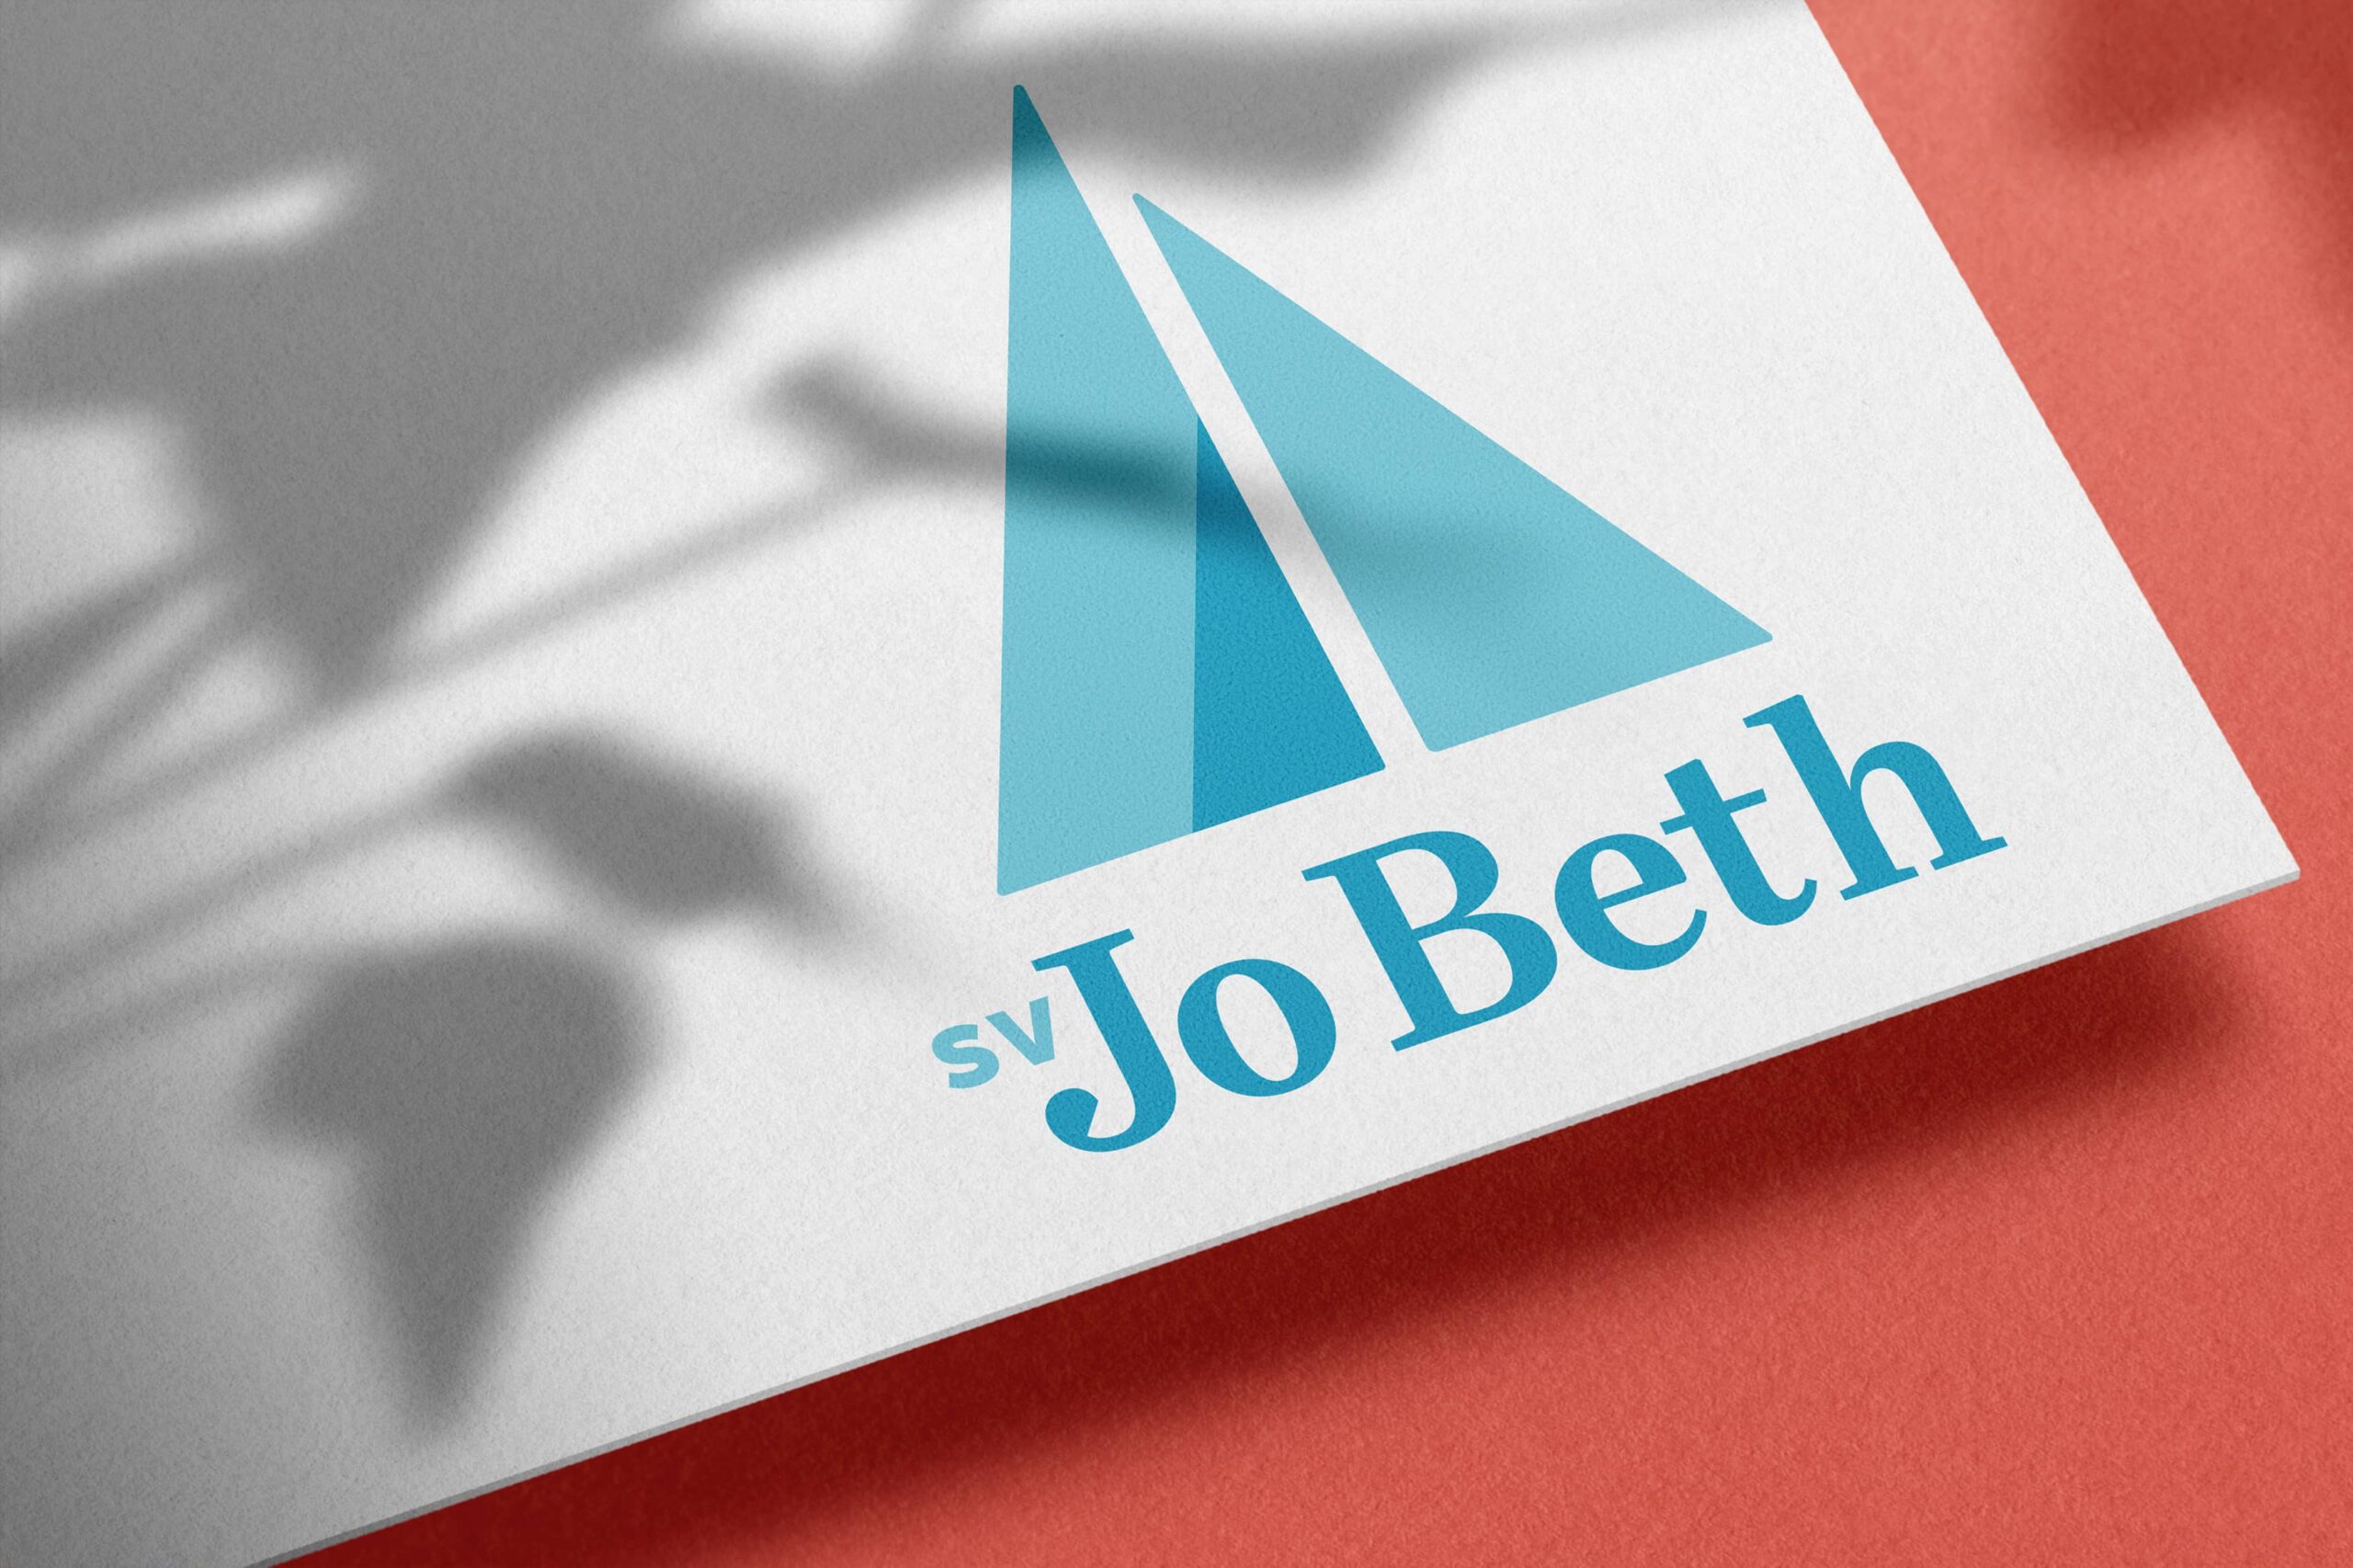 Visual brand identity design for SV Jo Beth by Olive Ridley Studios: mockup of the logo printed on a card